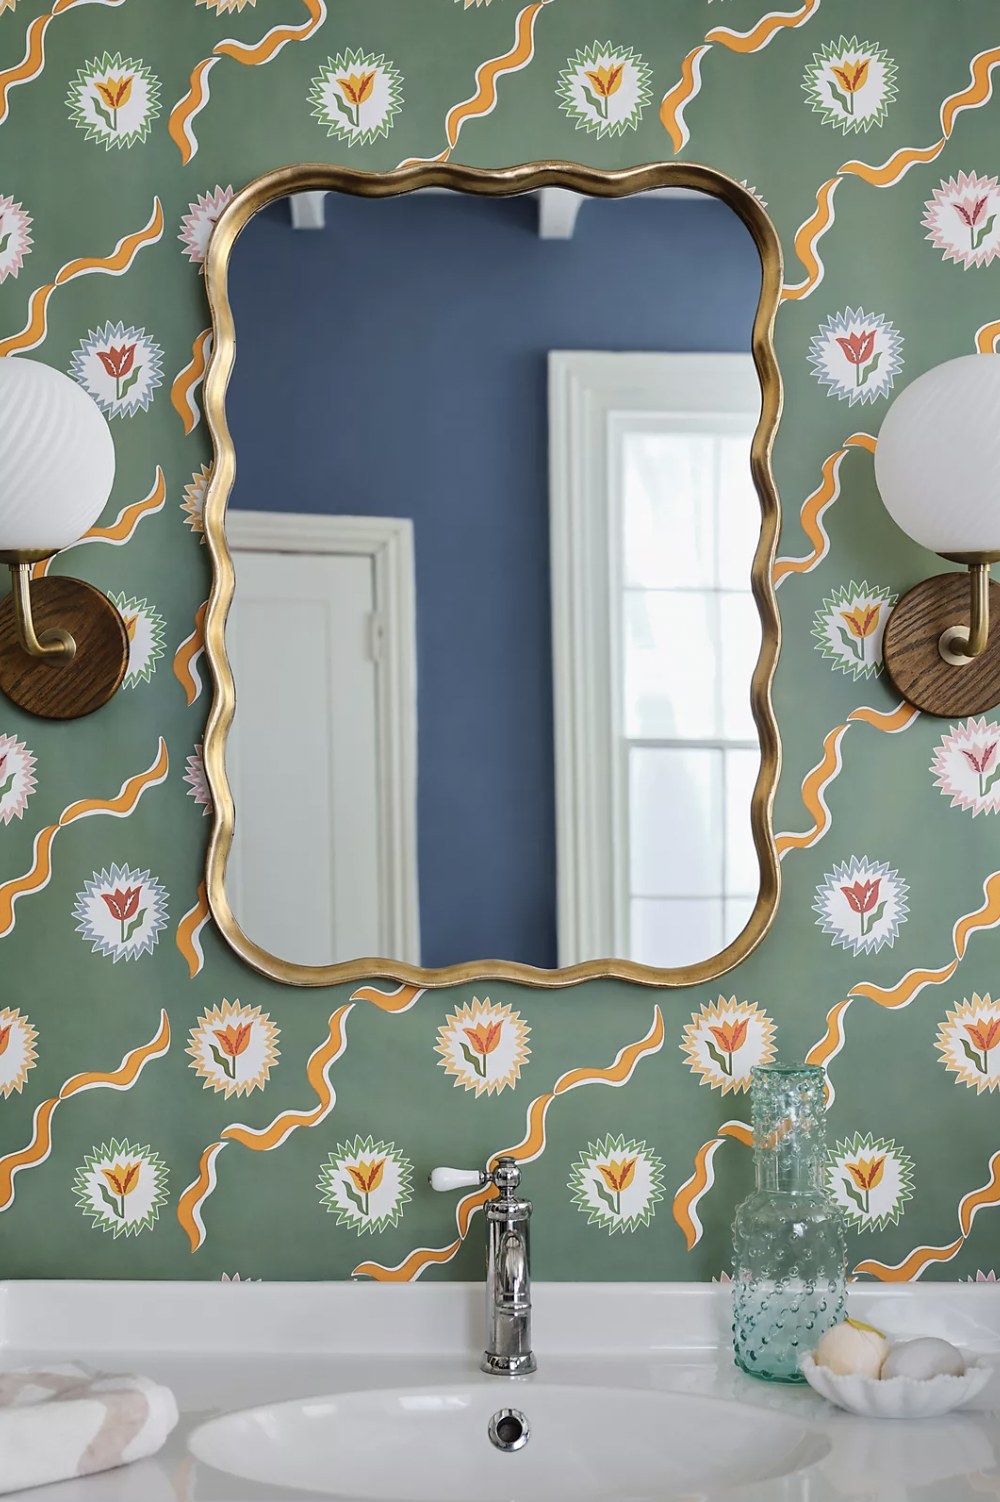 The wall mirror hanging above sink on patterned wallpaper